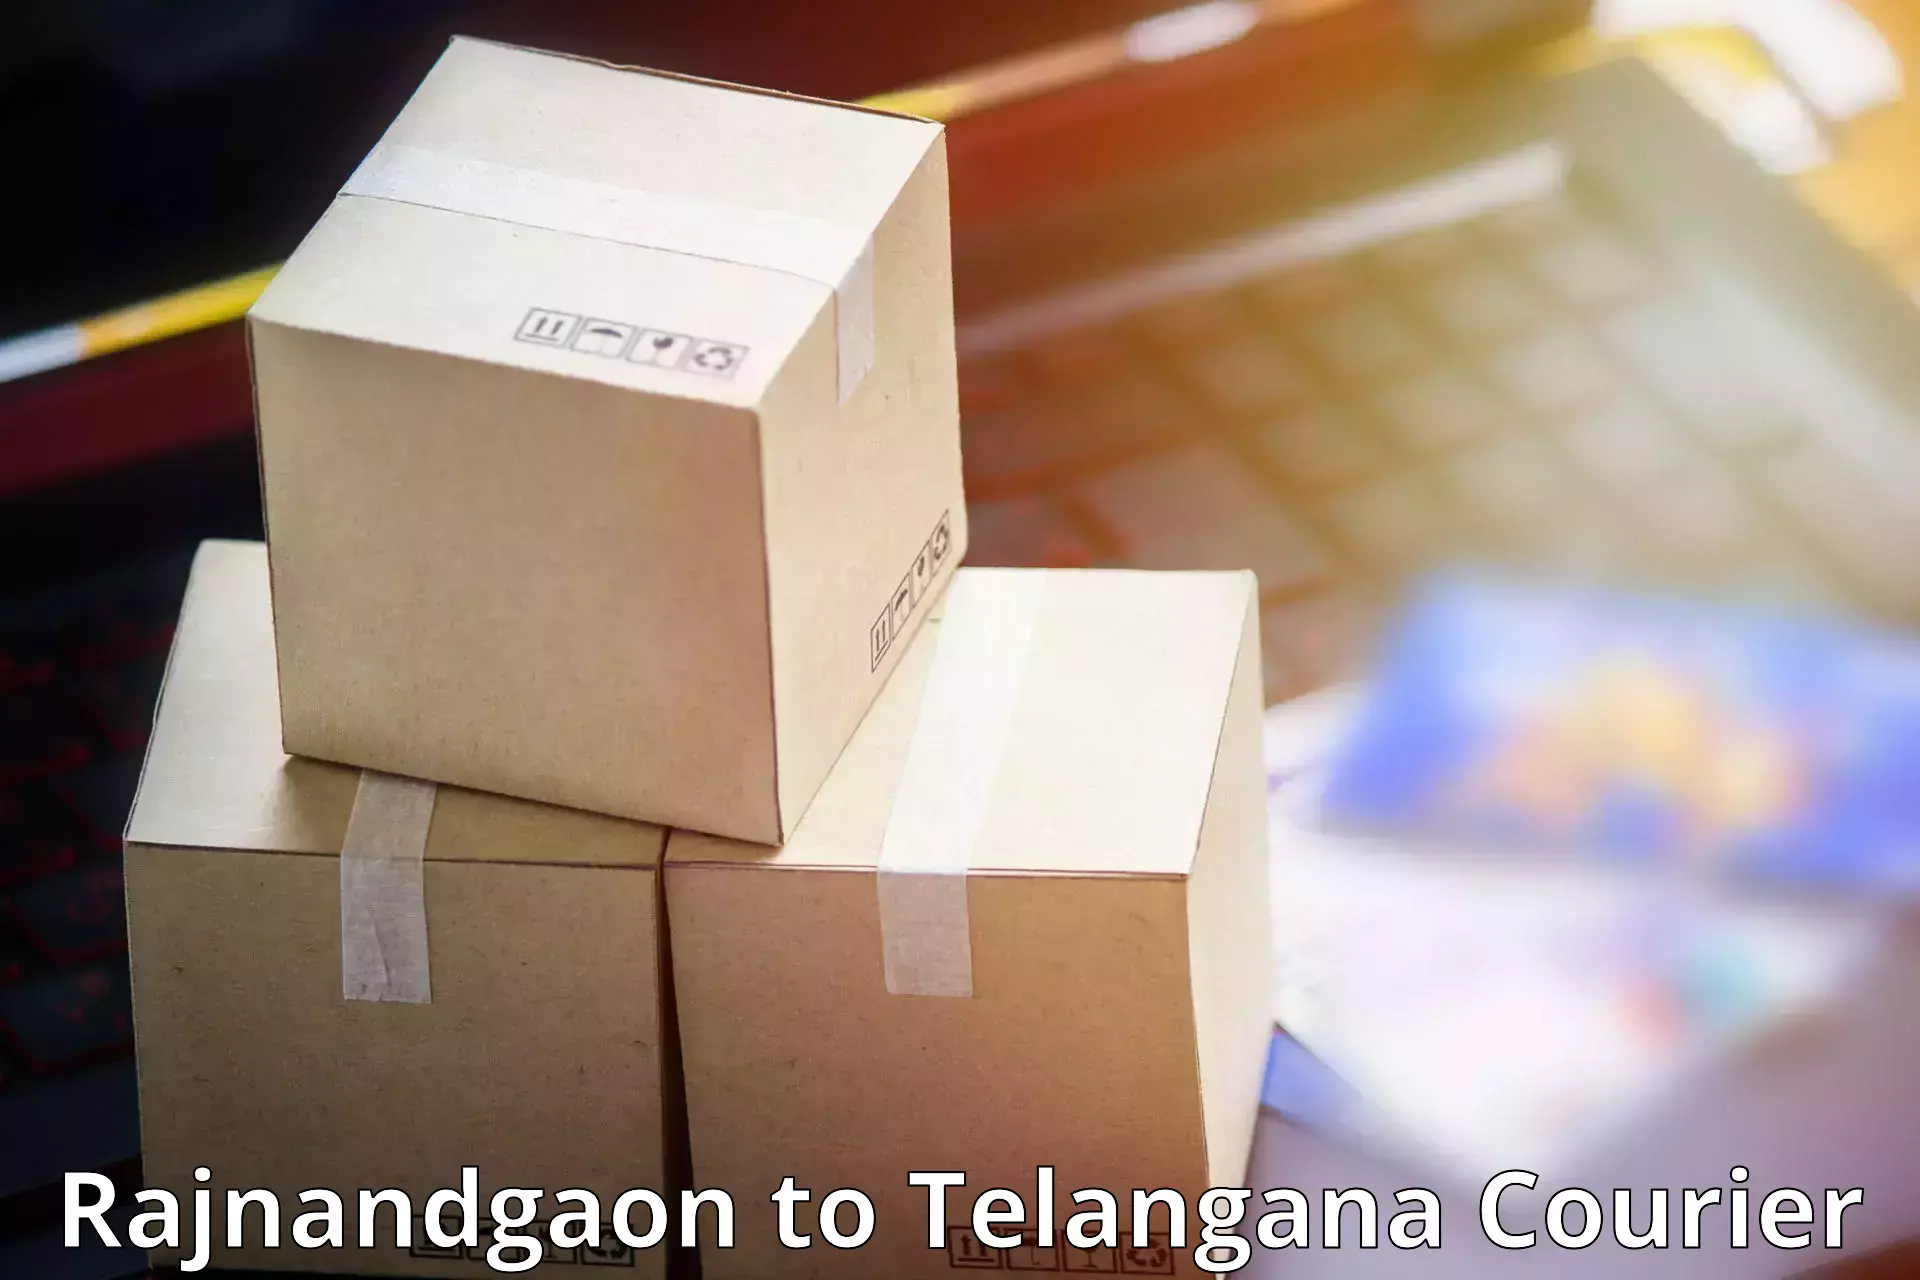 Business shipping needs Rajnandgaon to Sultanabad